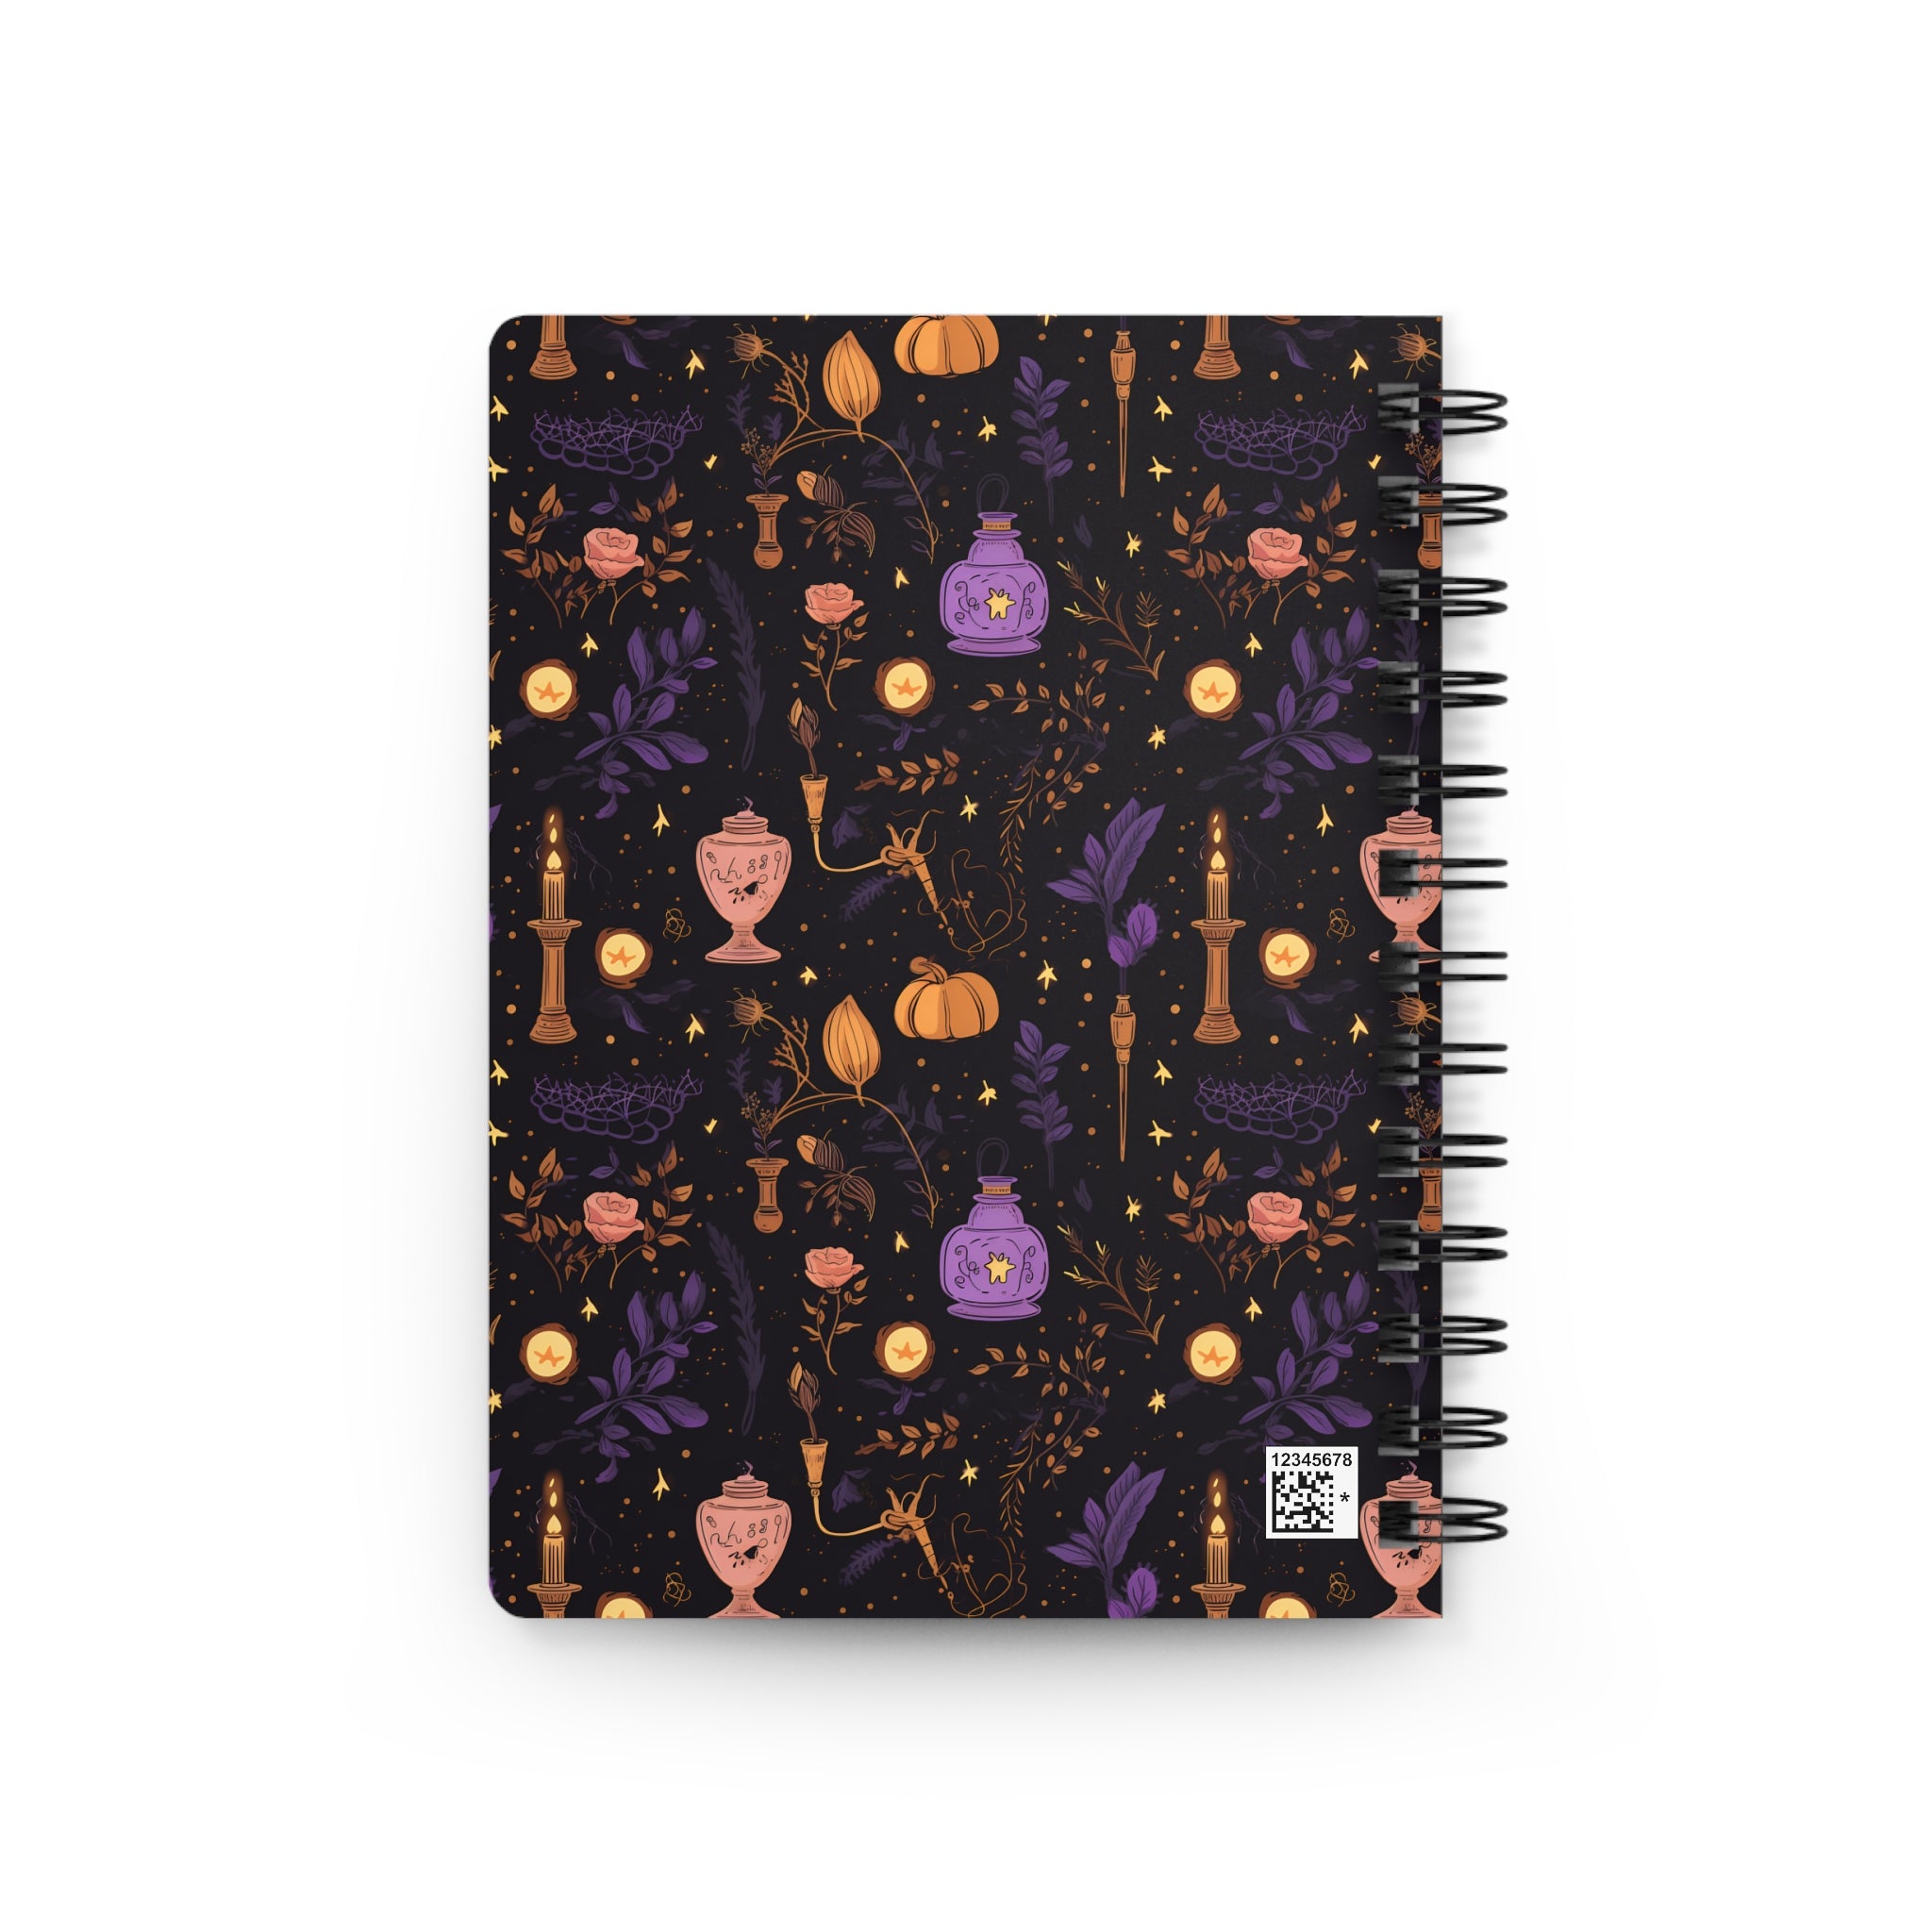 Witching Lanterns Spiral Notebook, Witchy Spiral Lined 5 x 7 inch